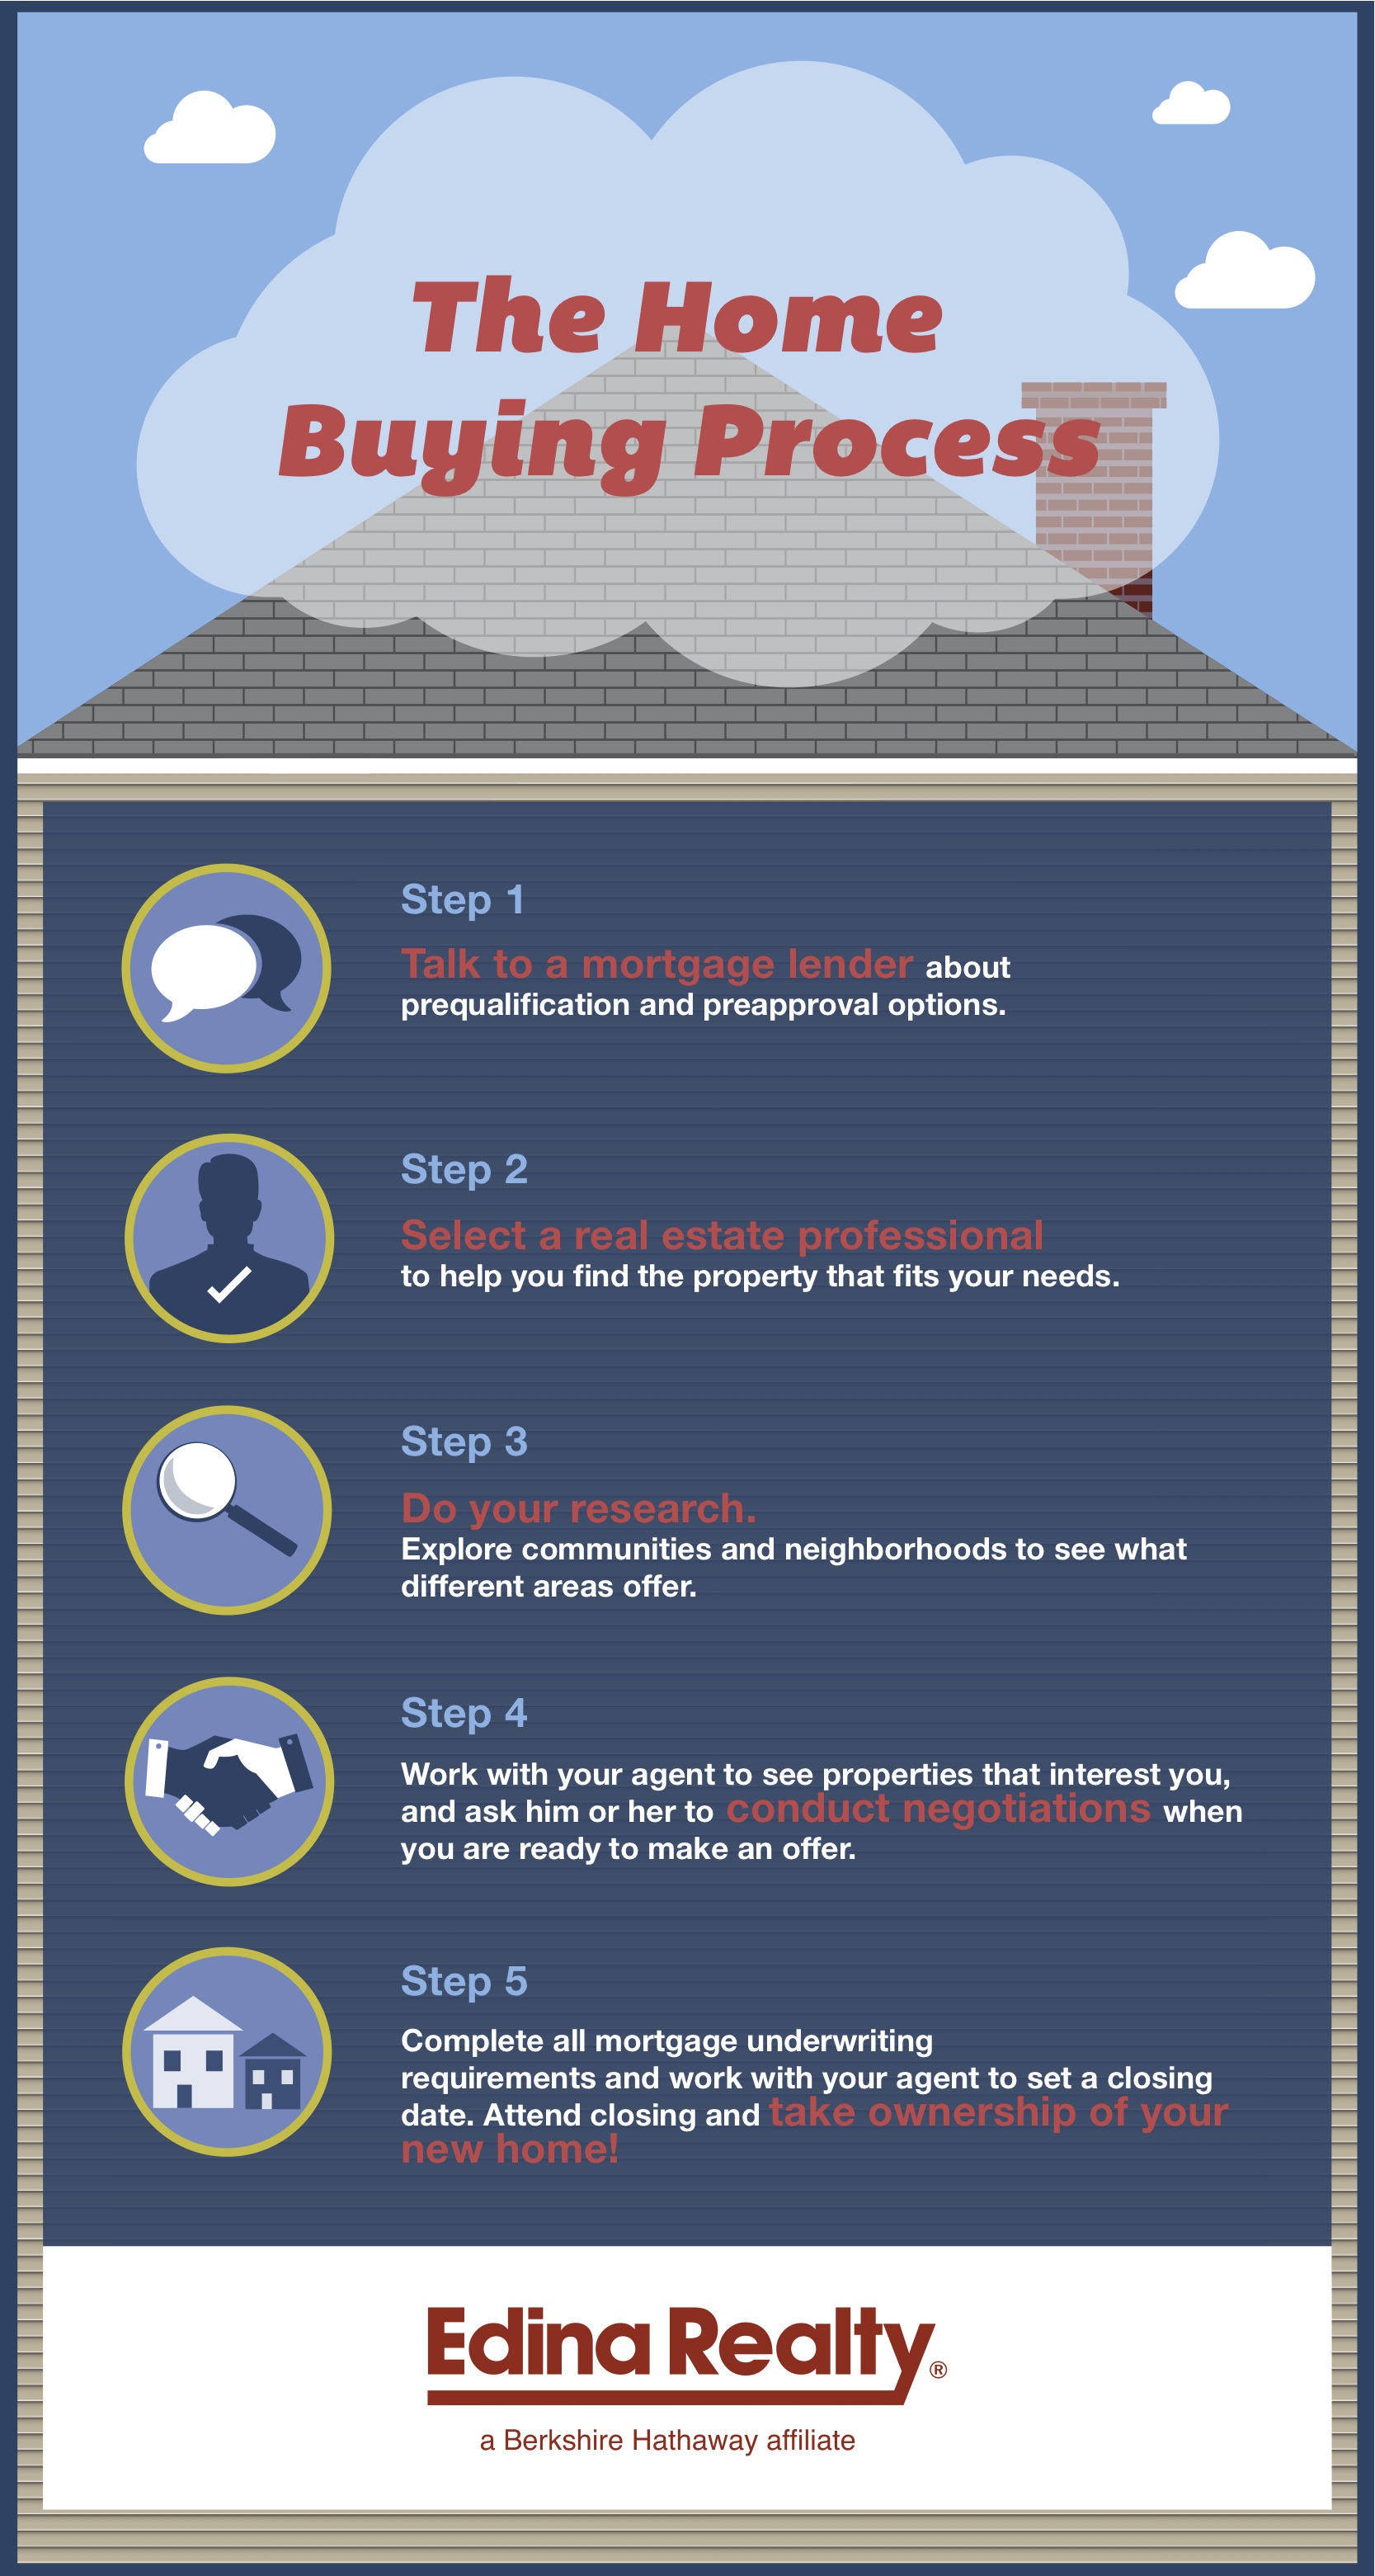 Home buying process infographic